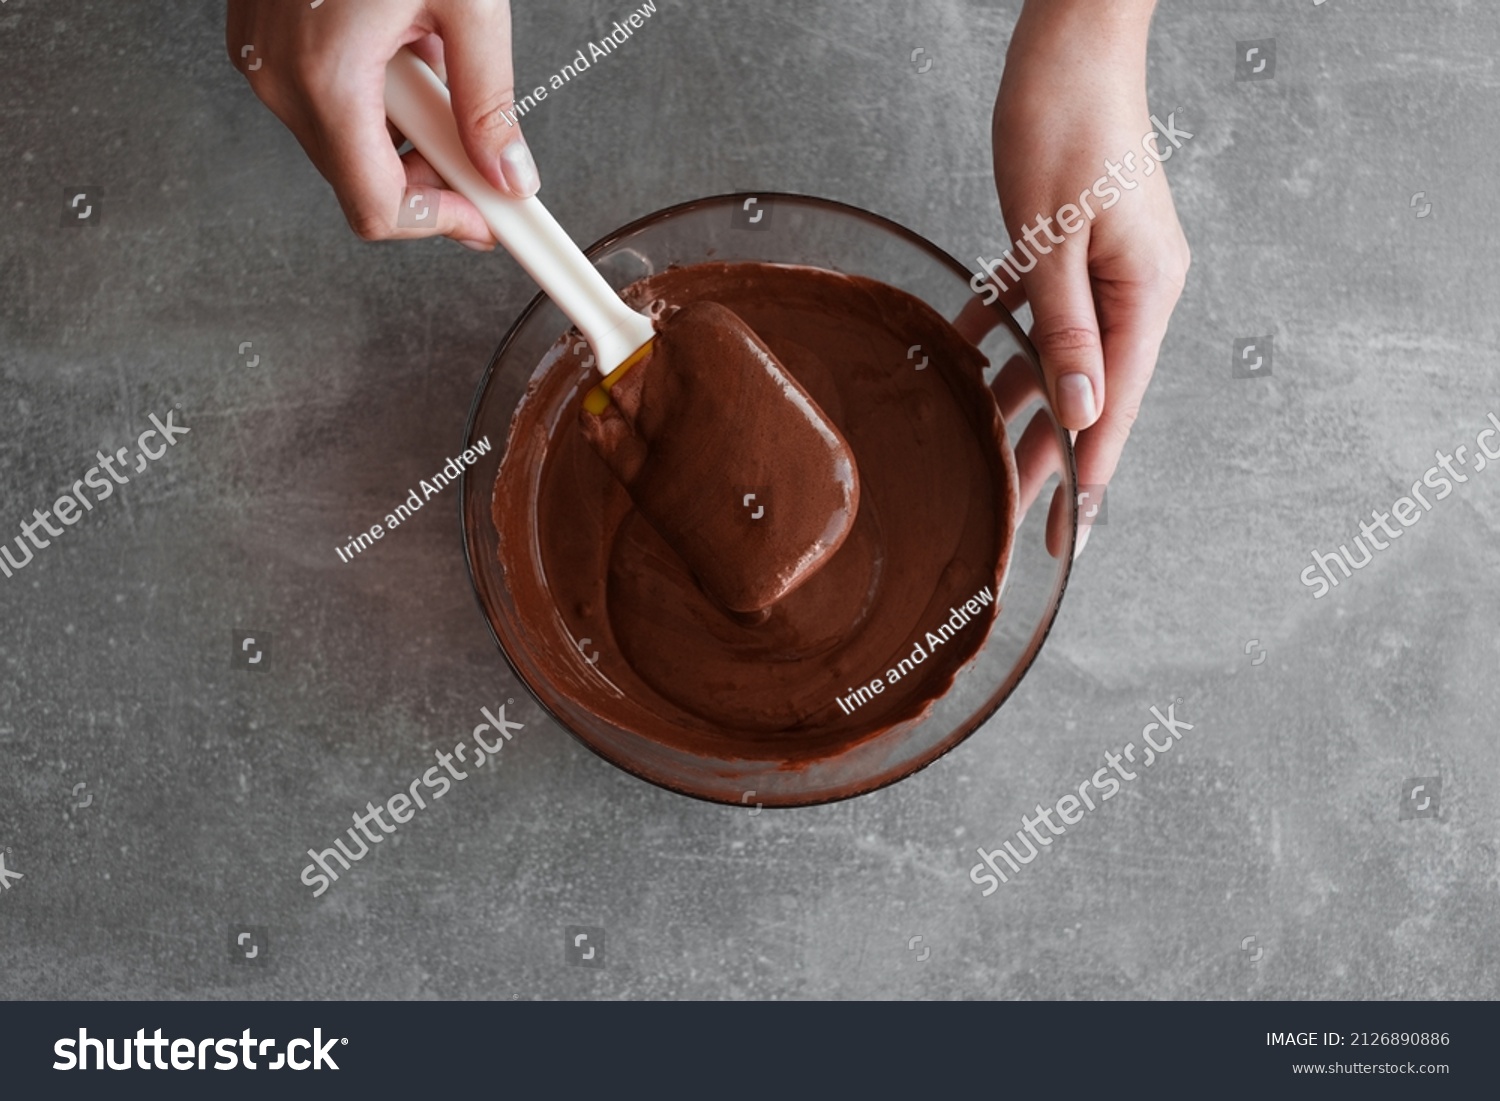 woman preparing chocolate mousse close-up top view #2126890886